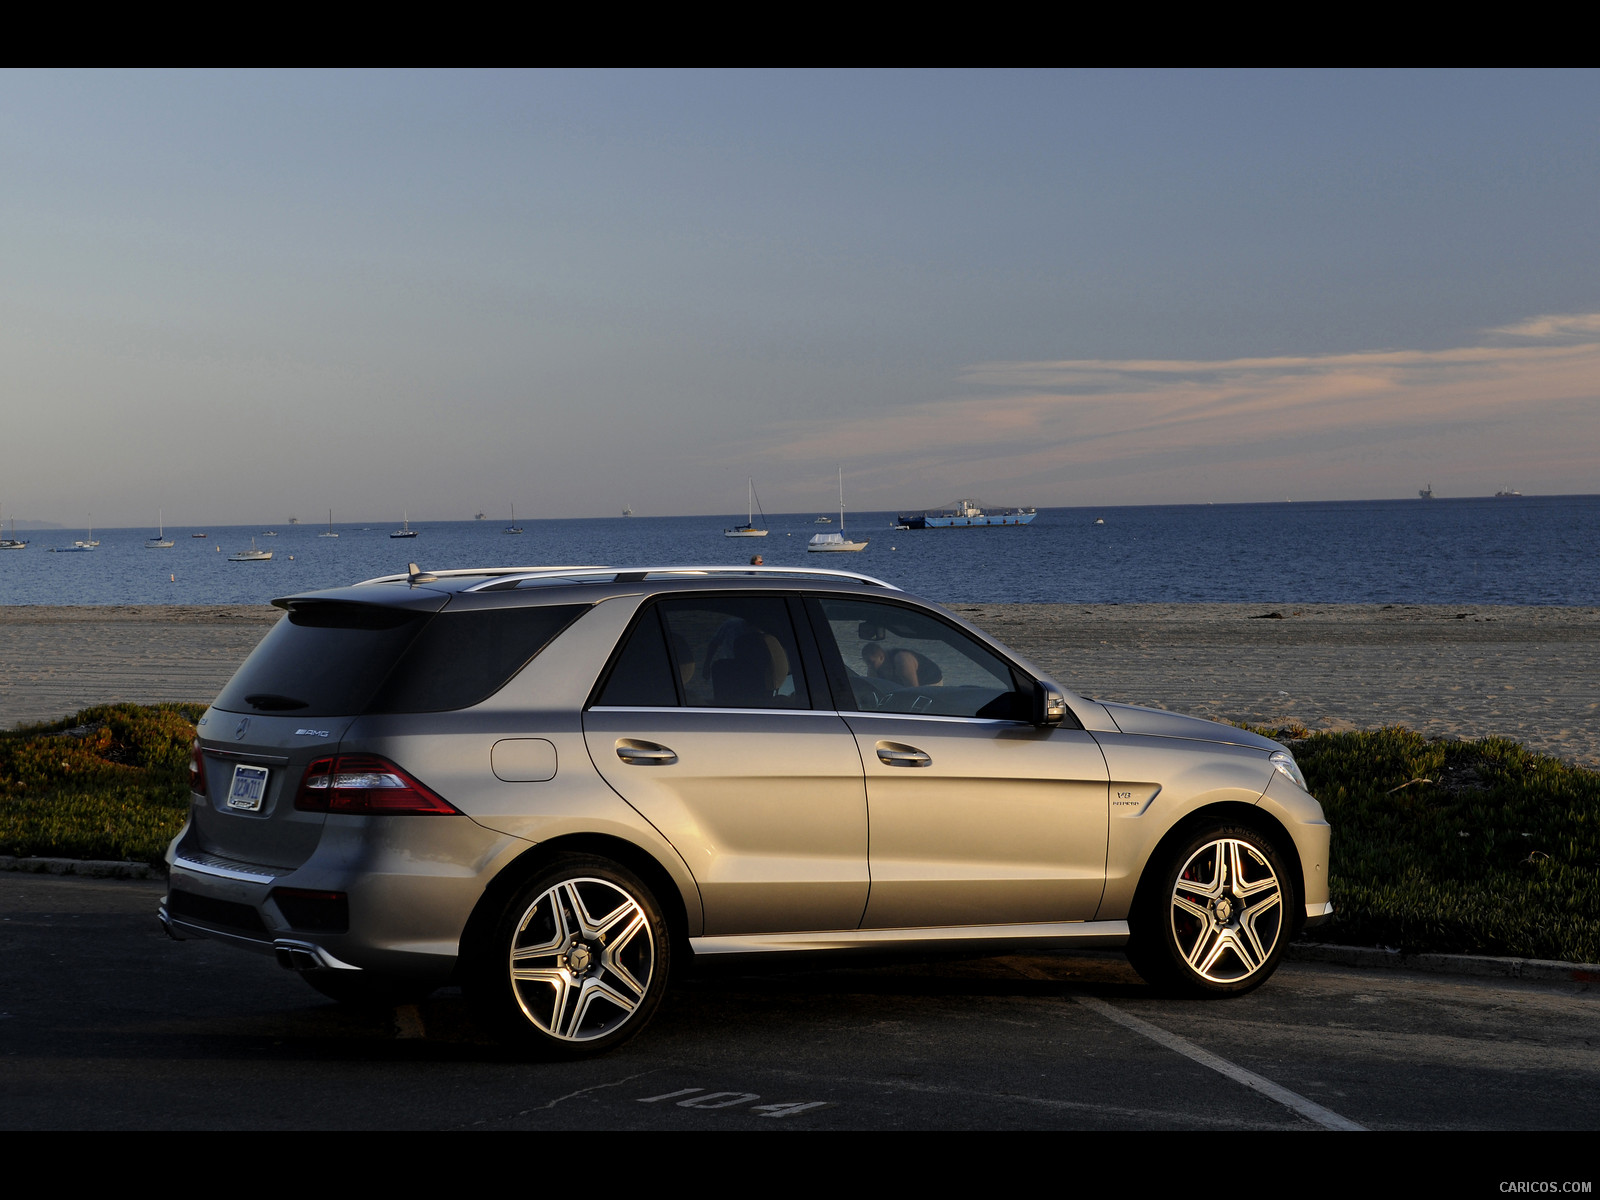 Mercedes-Benz (2012) ML 63 AMG  - Side, #3 of 89